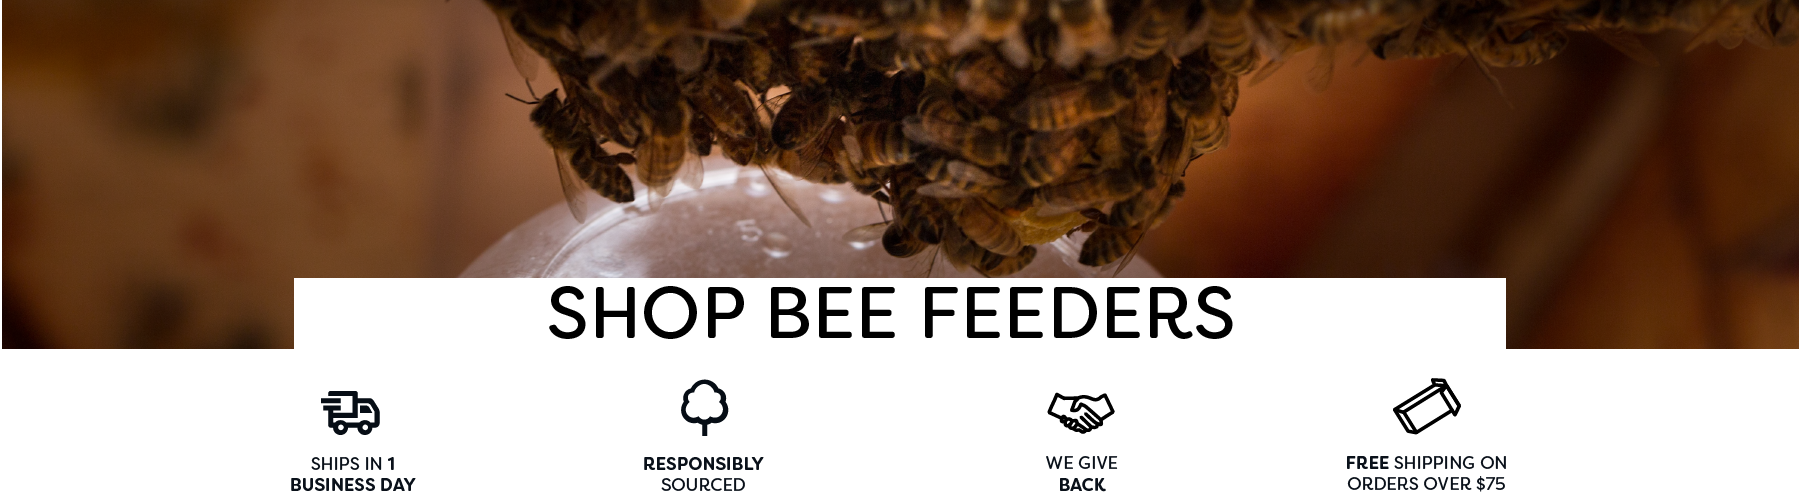 Bee feeders are used to supplement a colony at various times of the year, to improve viability. Beekeepers often feed their hives in the spring upon installation of a new package of bees or in the fall if the colony is low on honey stores. 